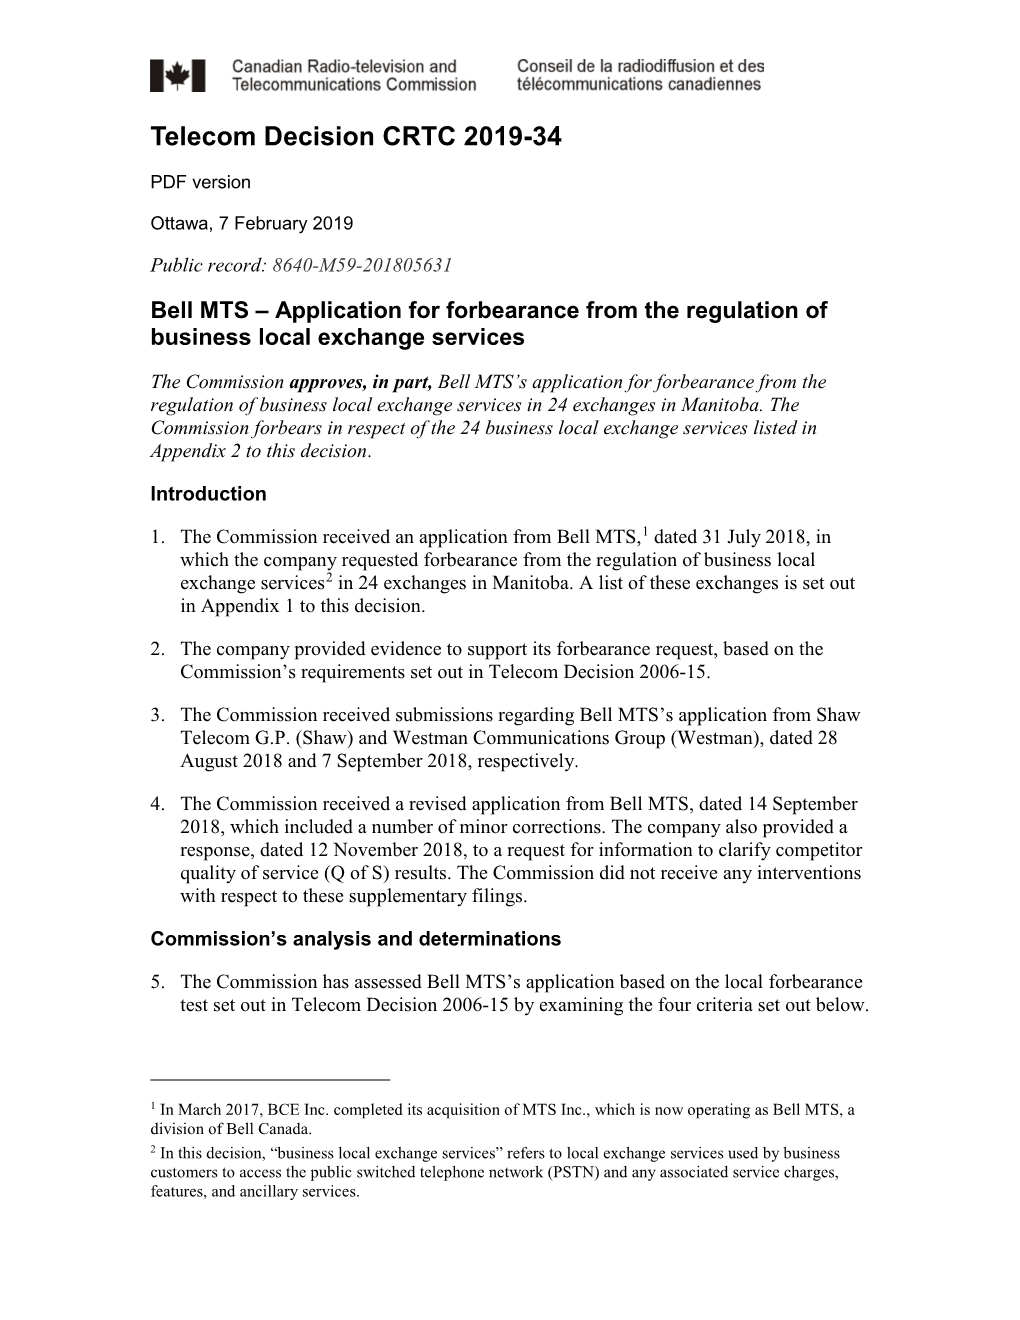 Bell MTS – Application for Forbearance from the Regulation of Business Local Exchange Services